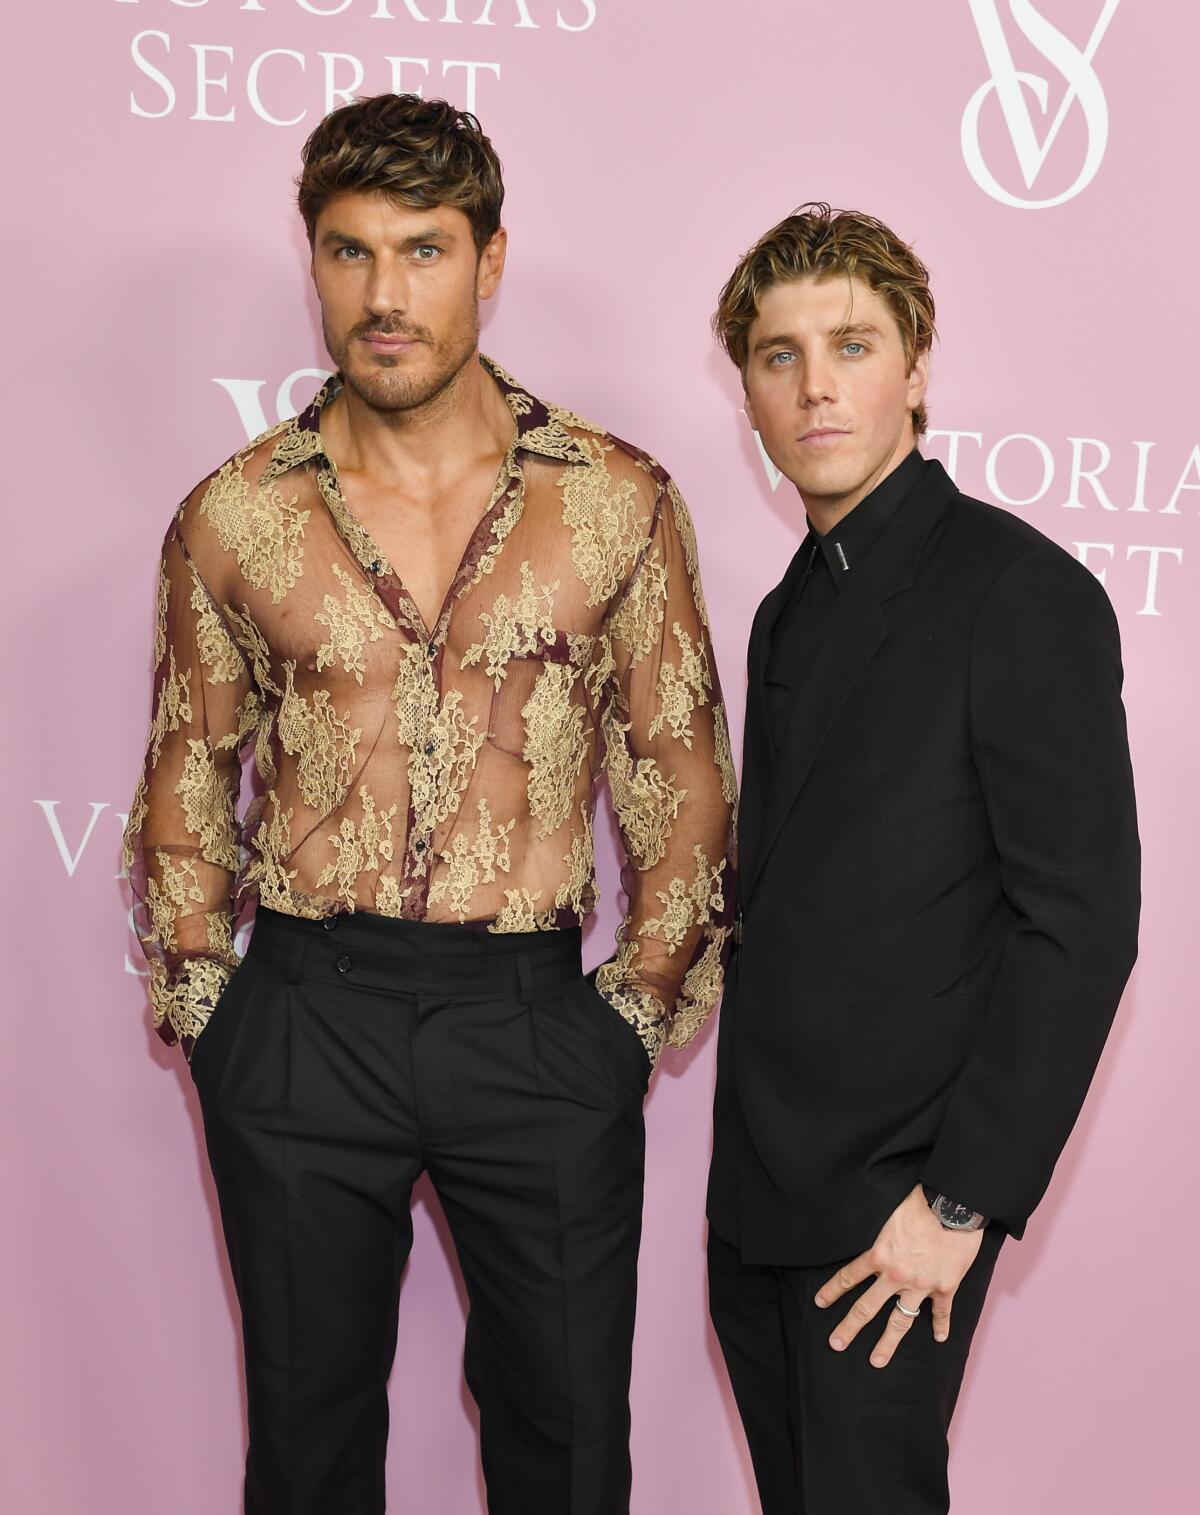 Chris Appleton is wearing a sheer gold and black top and poses alongside Lukas Gage in a black shirt and pants